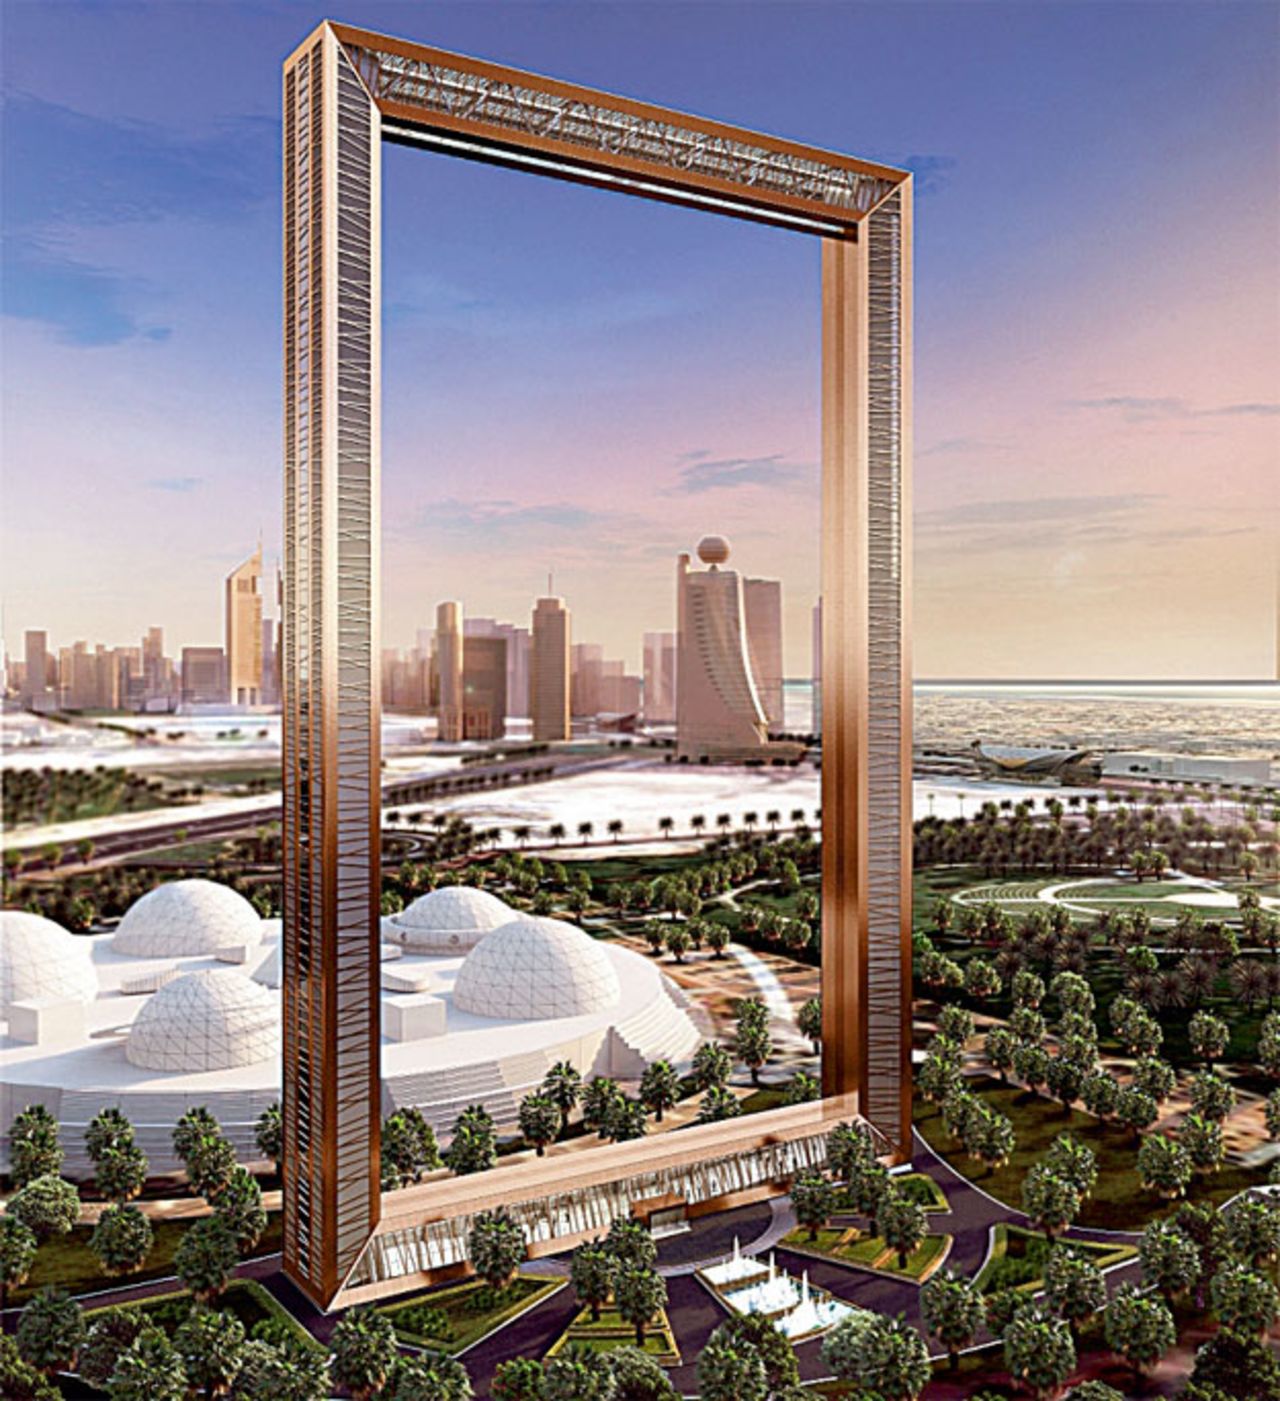 A digitalized image of what the Dubai Frame will look like once construction is completed.